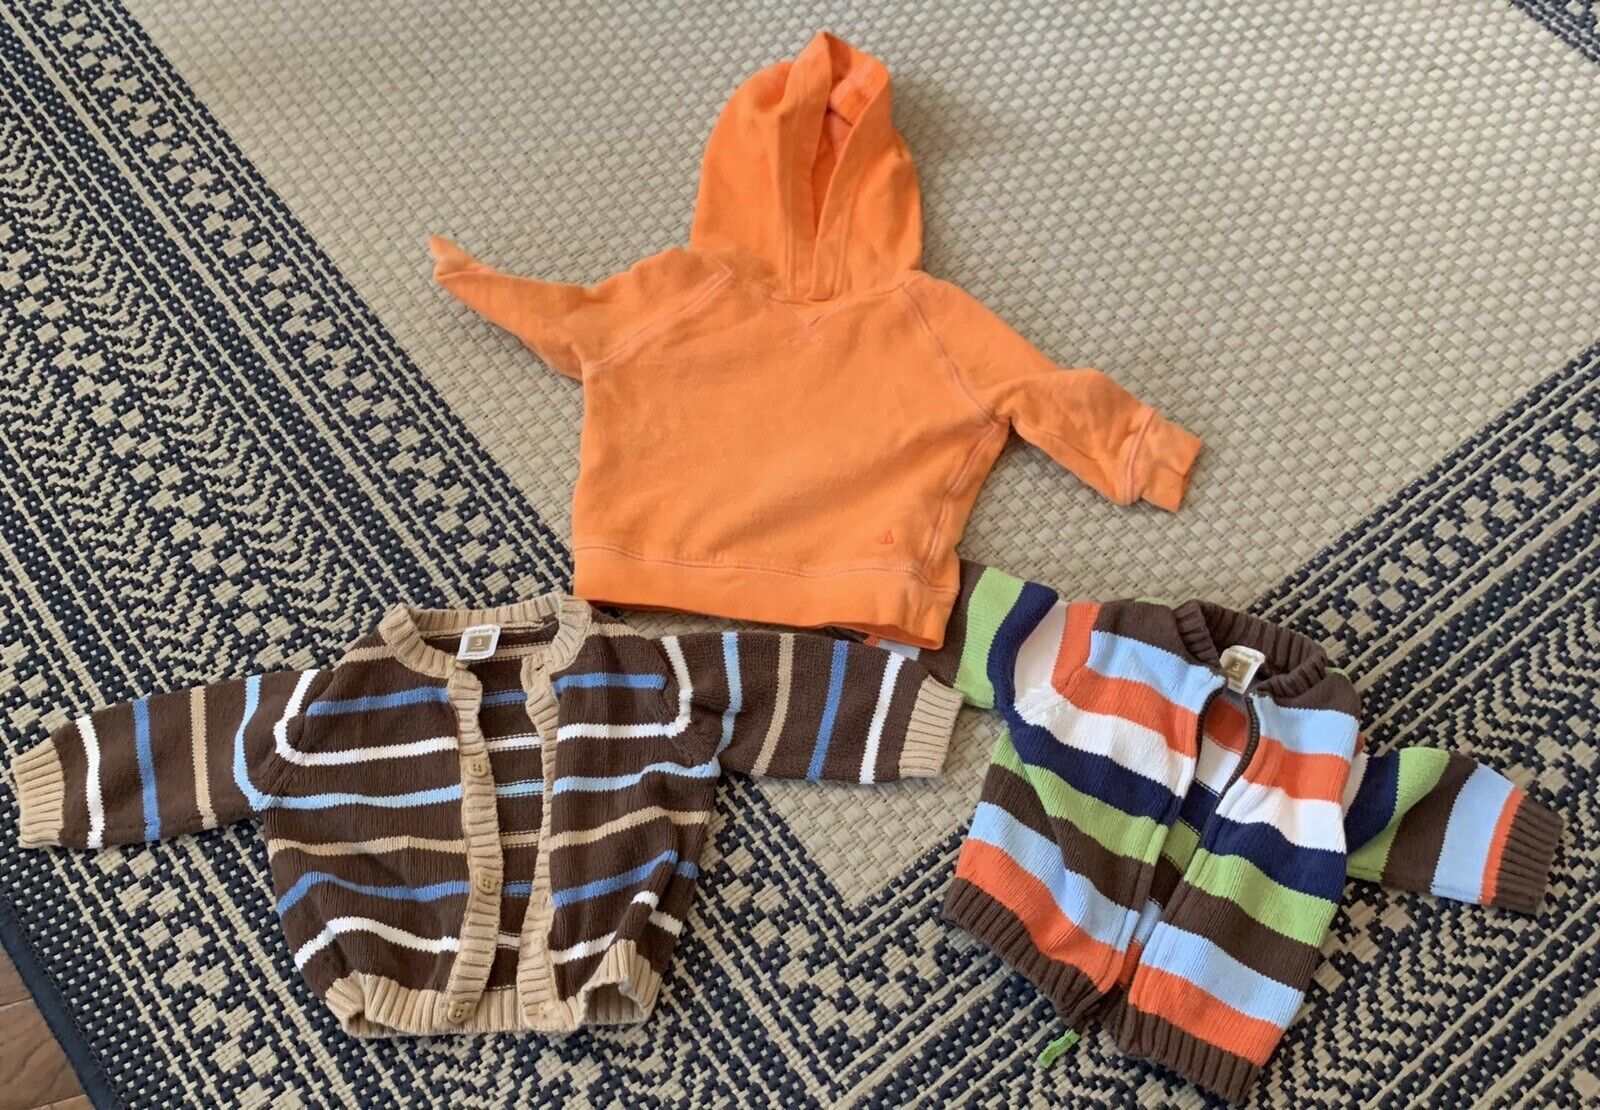 Baby Boy Carter’s Sweater Lot Of 3 Size 3 Months - $14.84